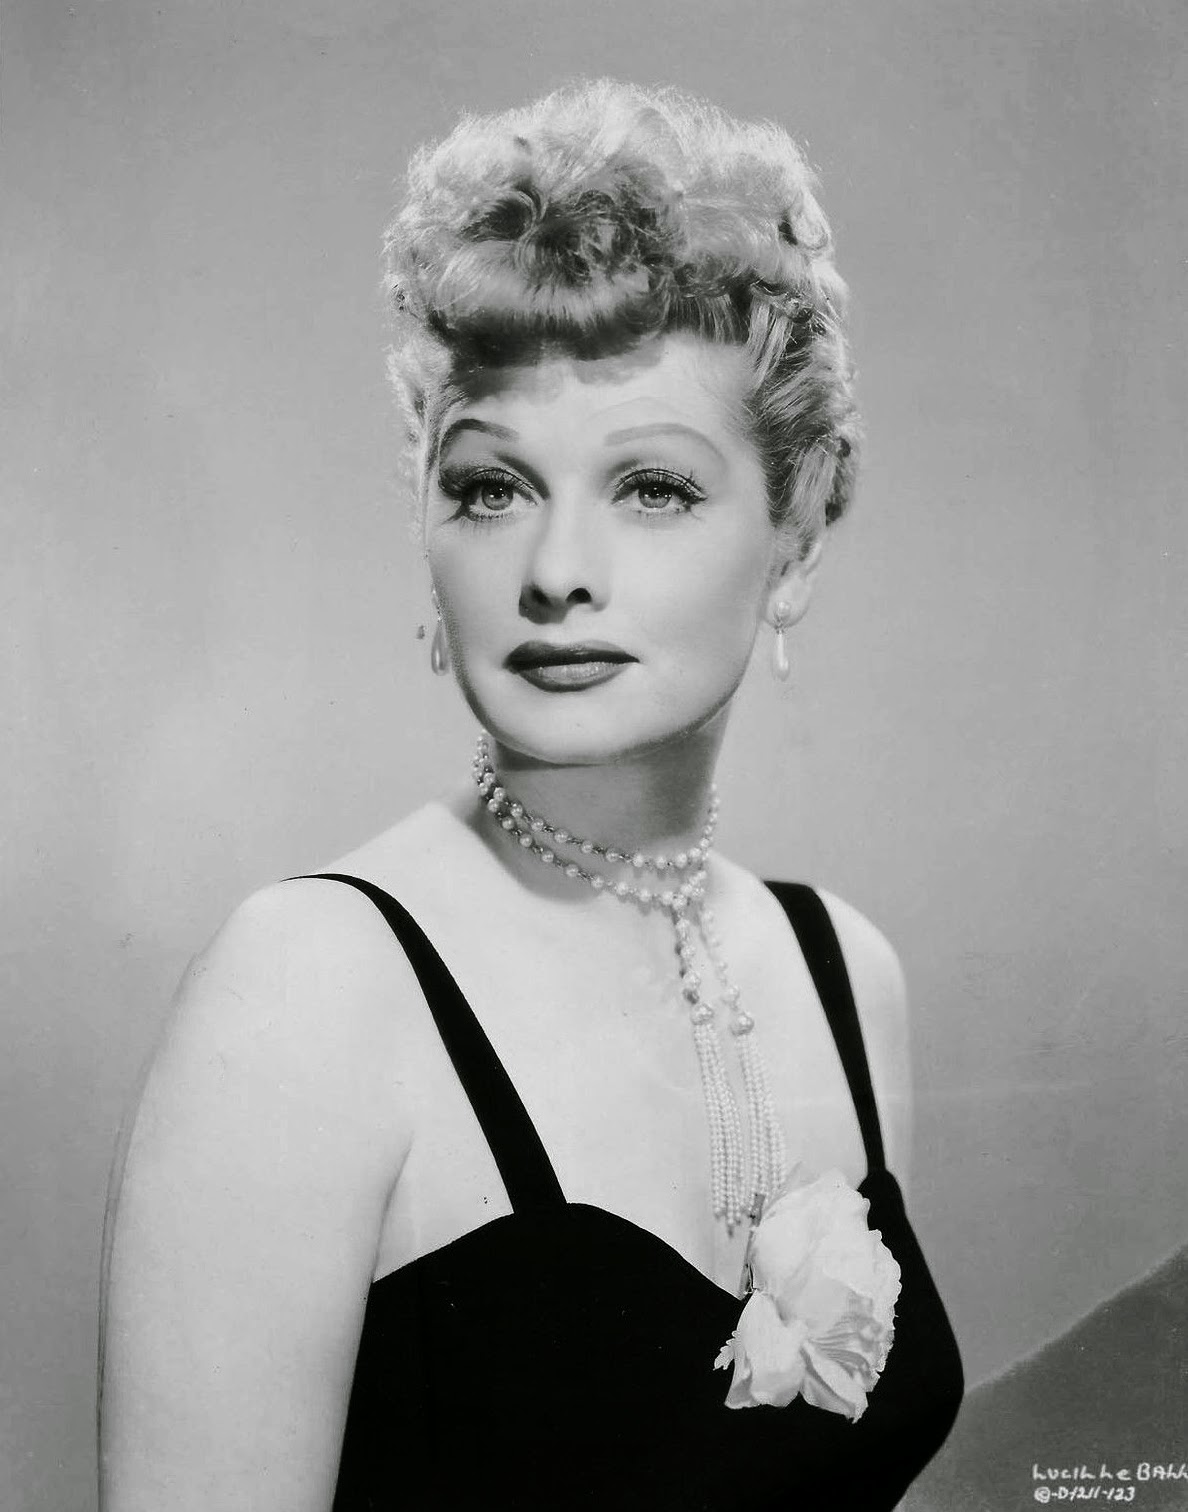 Slice of Cheesecake: Lucille Ball, pictorial